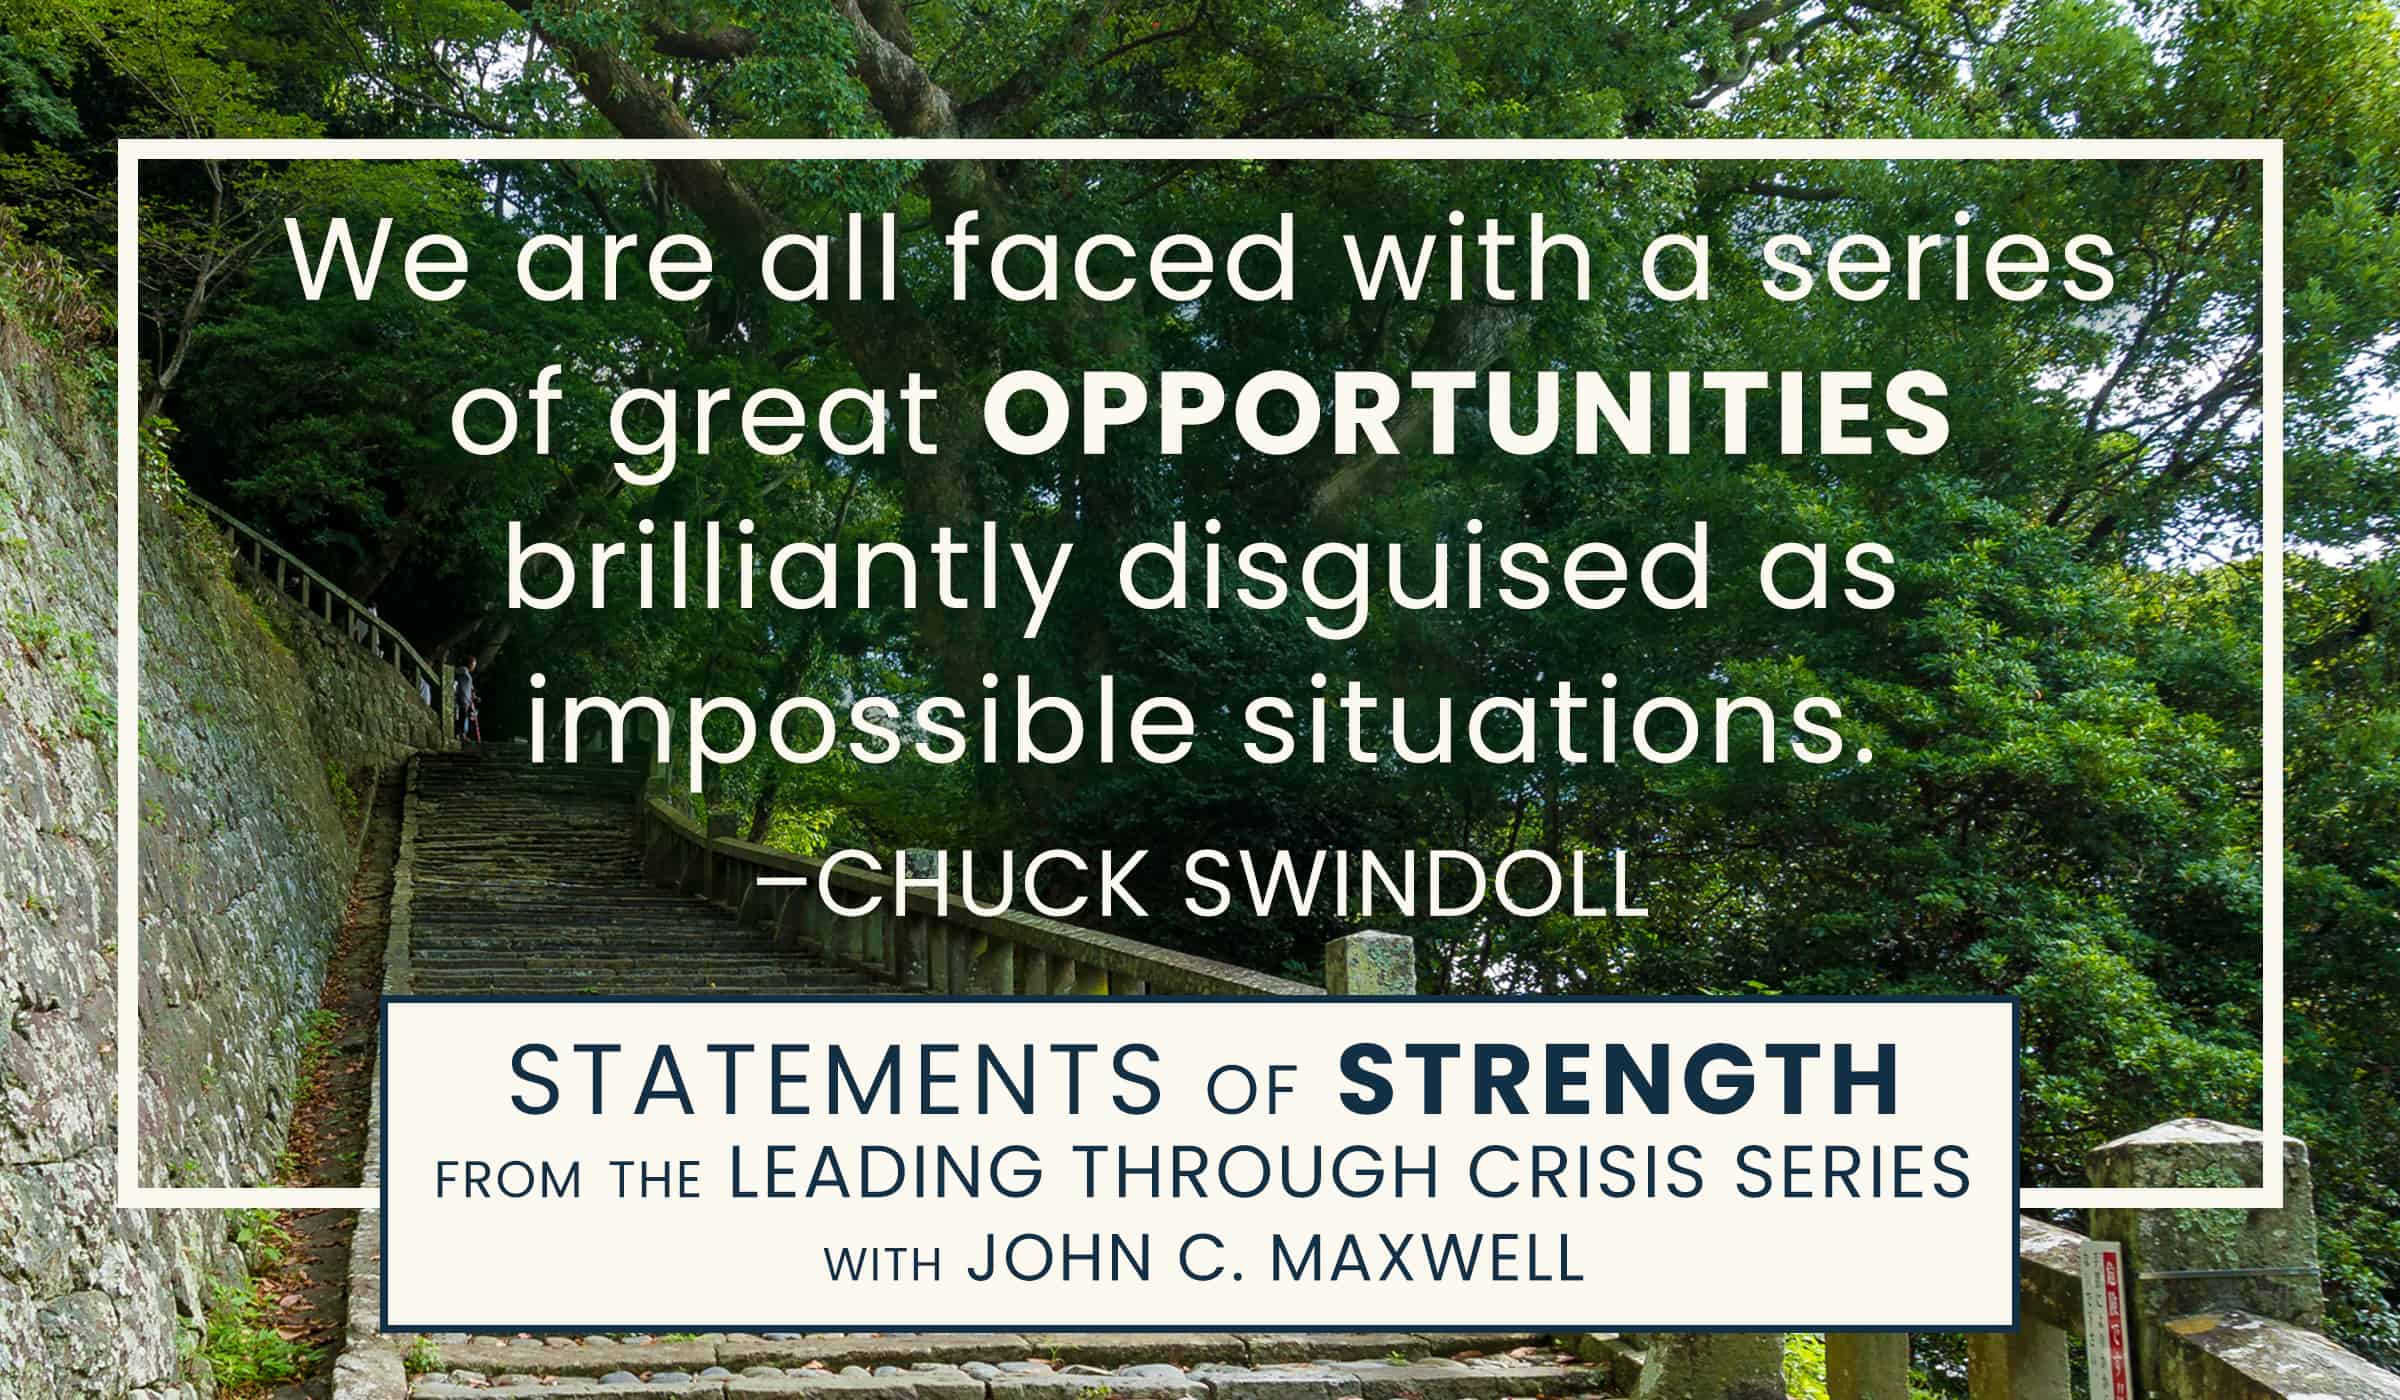 image of quote pic with quotation by chuck swindoll on opportunities